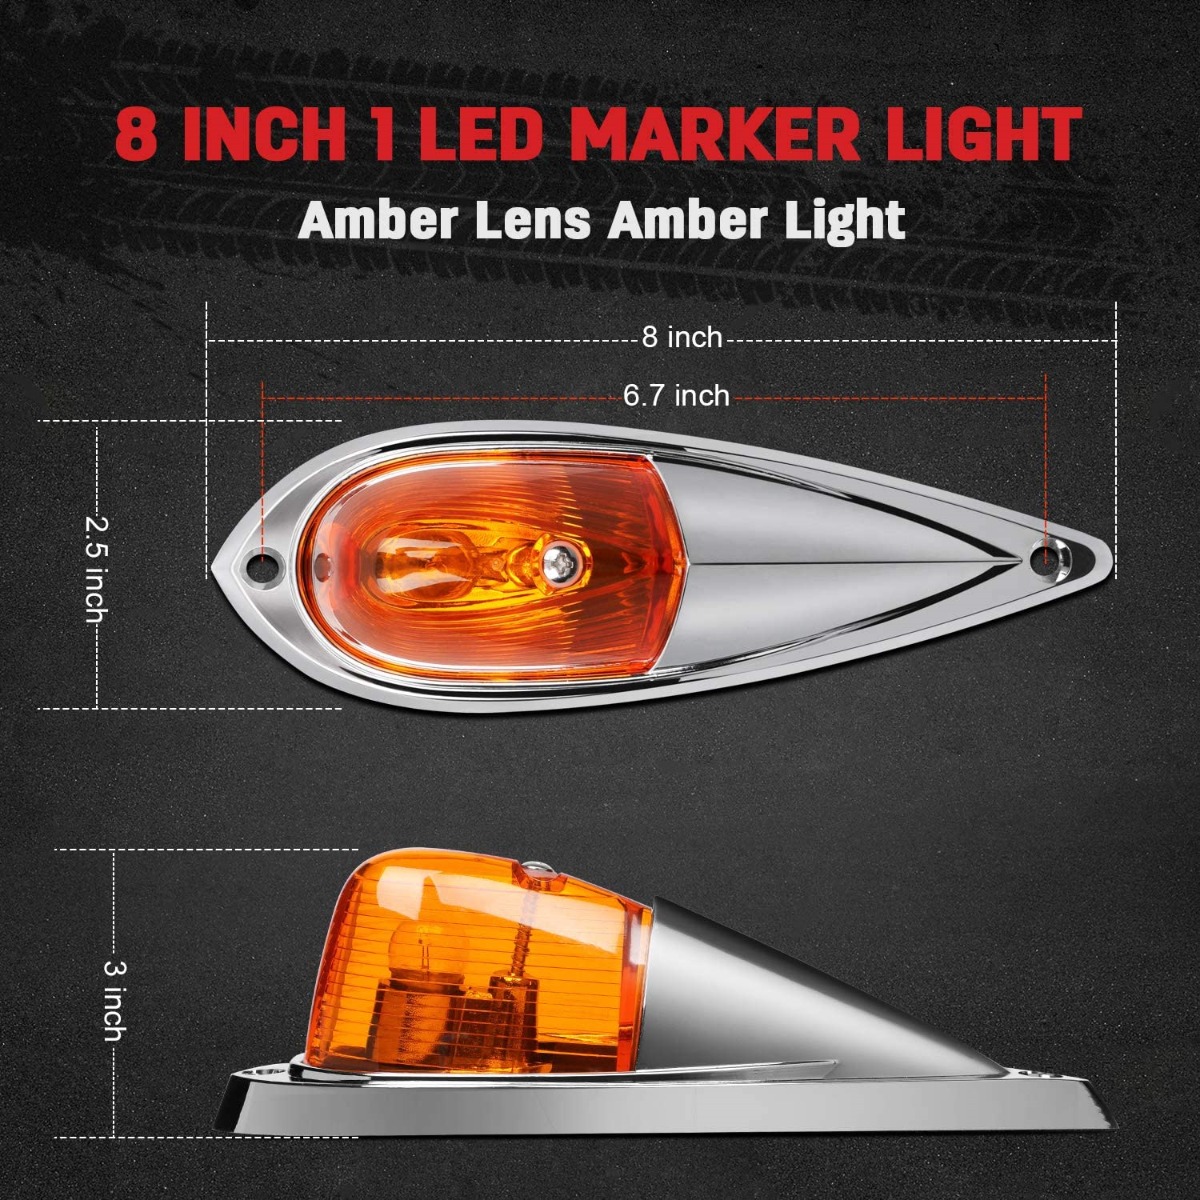 5PCS Amber Cab Marker/Roof/Clearance Light Teardrop Style Assembly for Truck Trailer Semi-trailer Dodge Ram